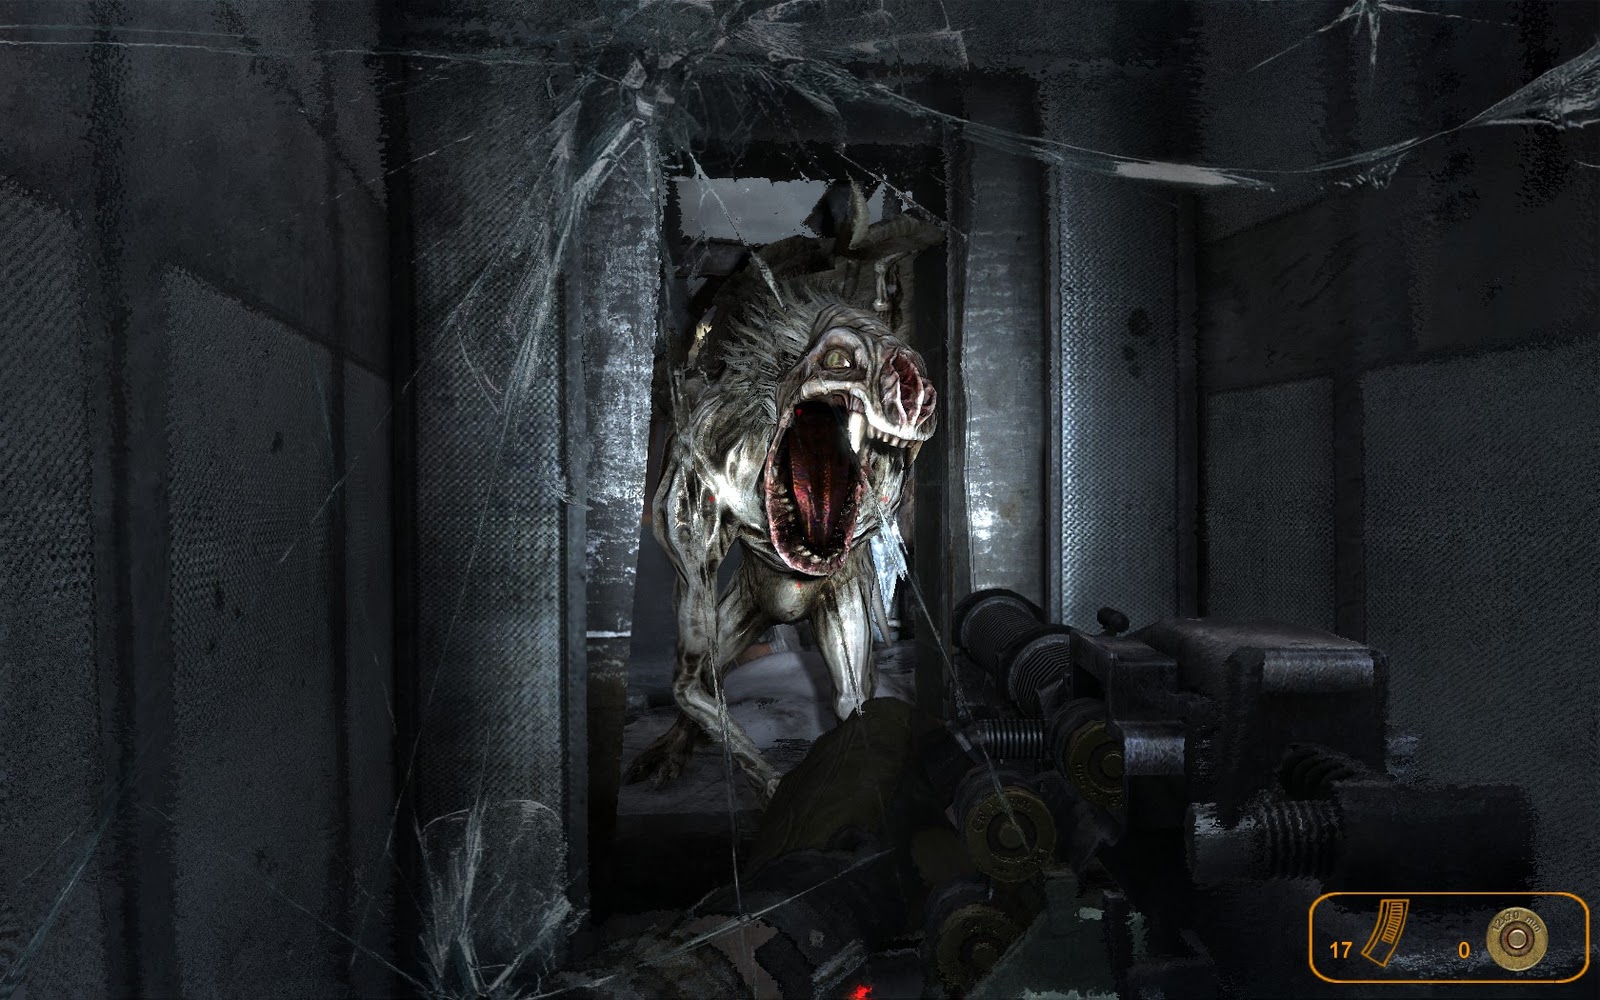 Metro 2033 pc game system requirements